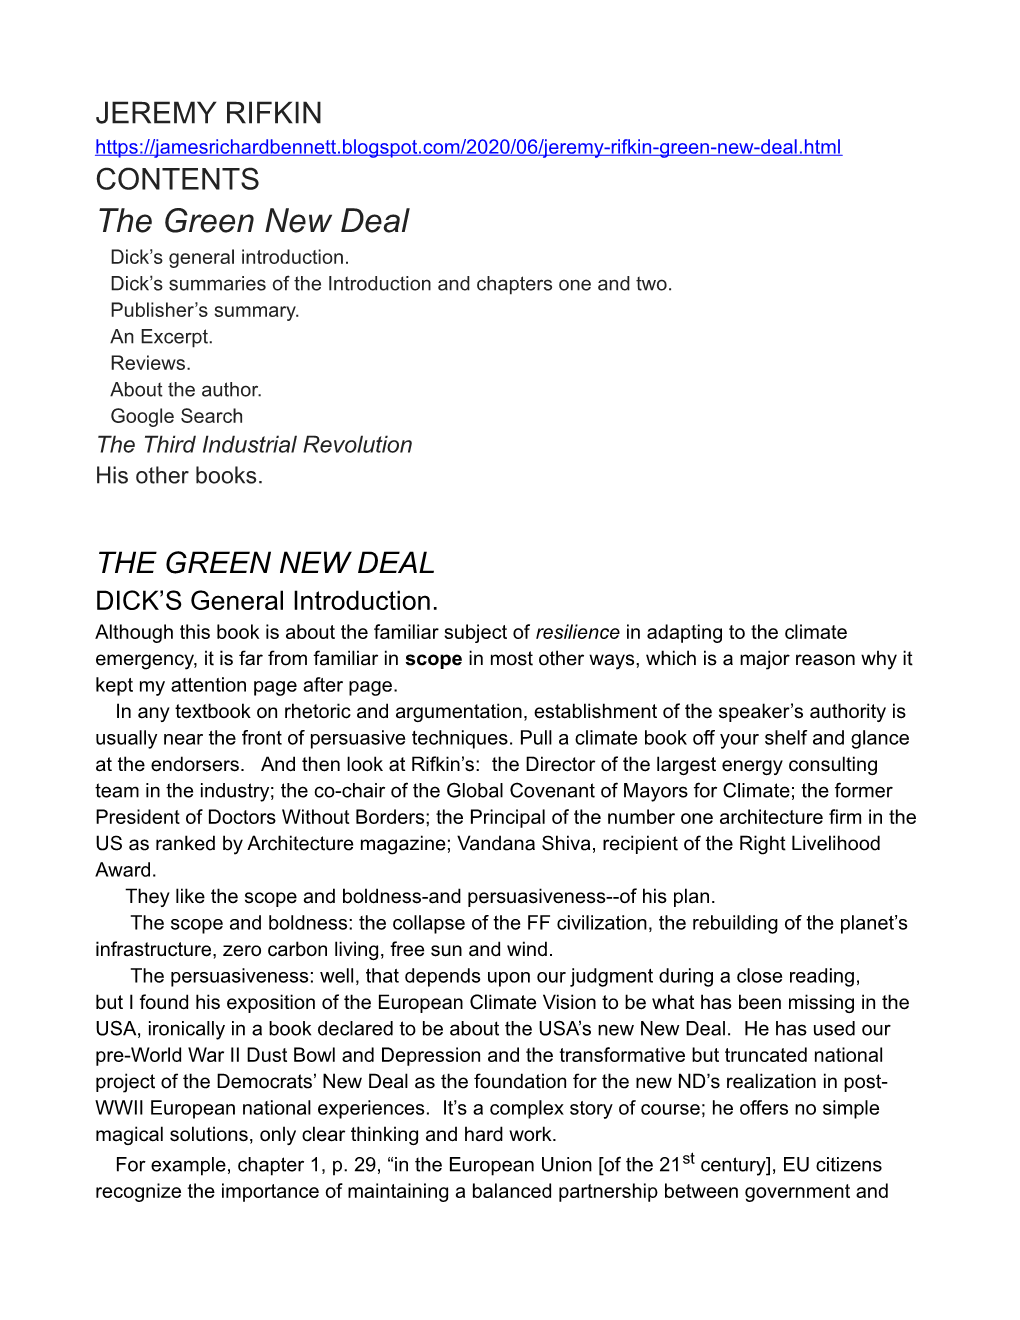 The Green New Deal Dick’S General Introduction